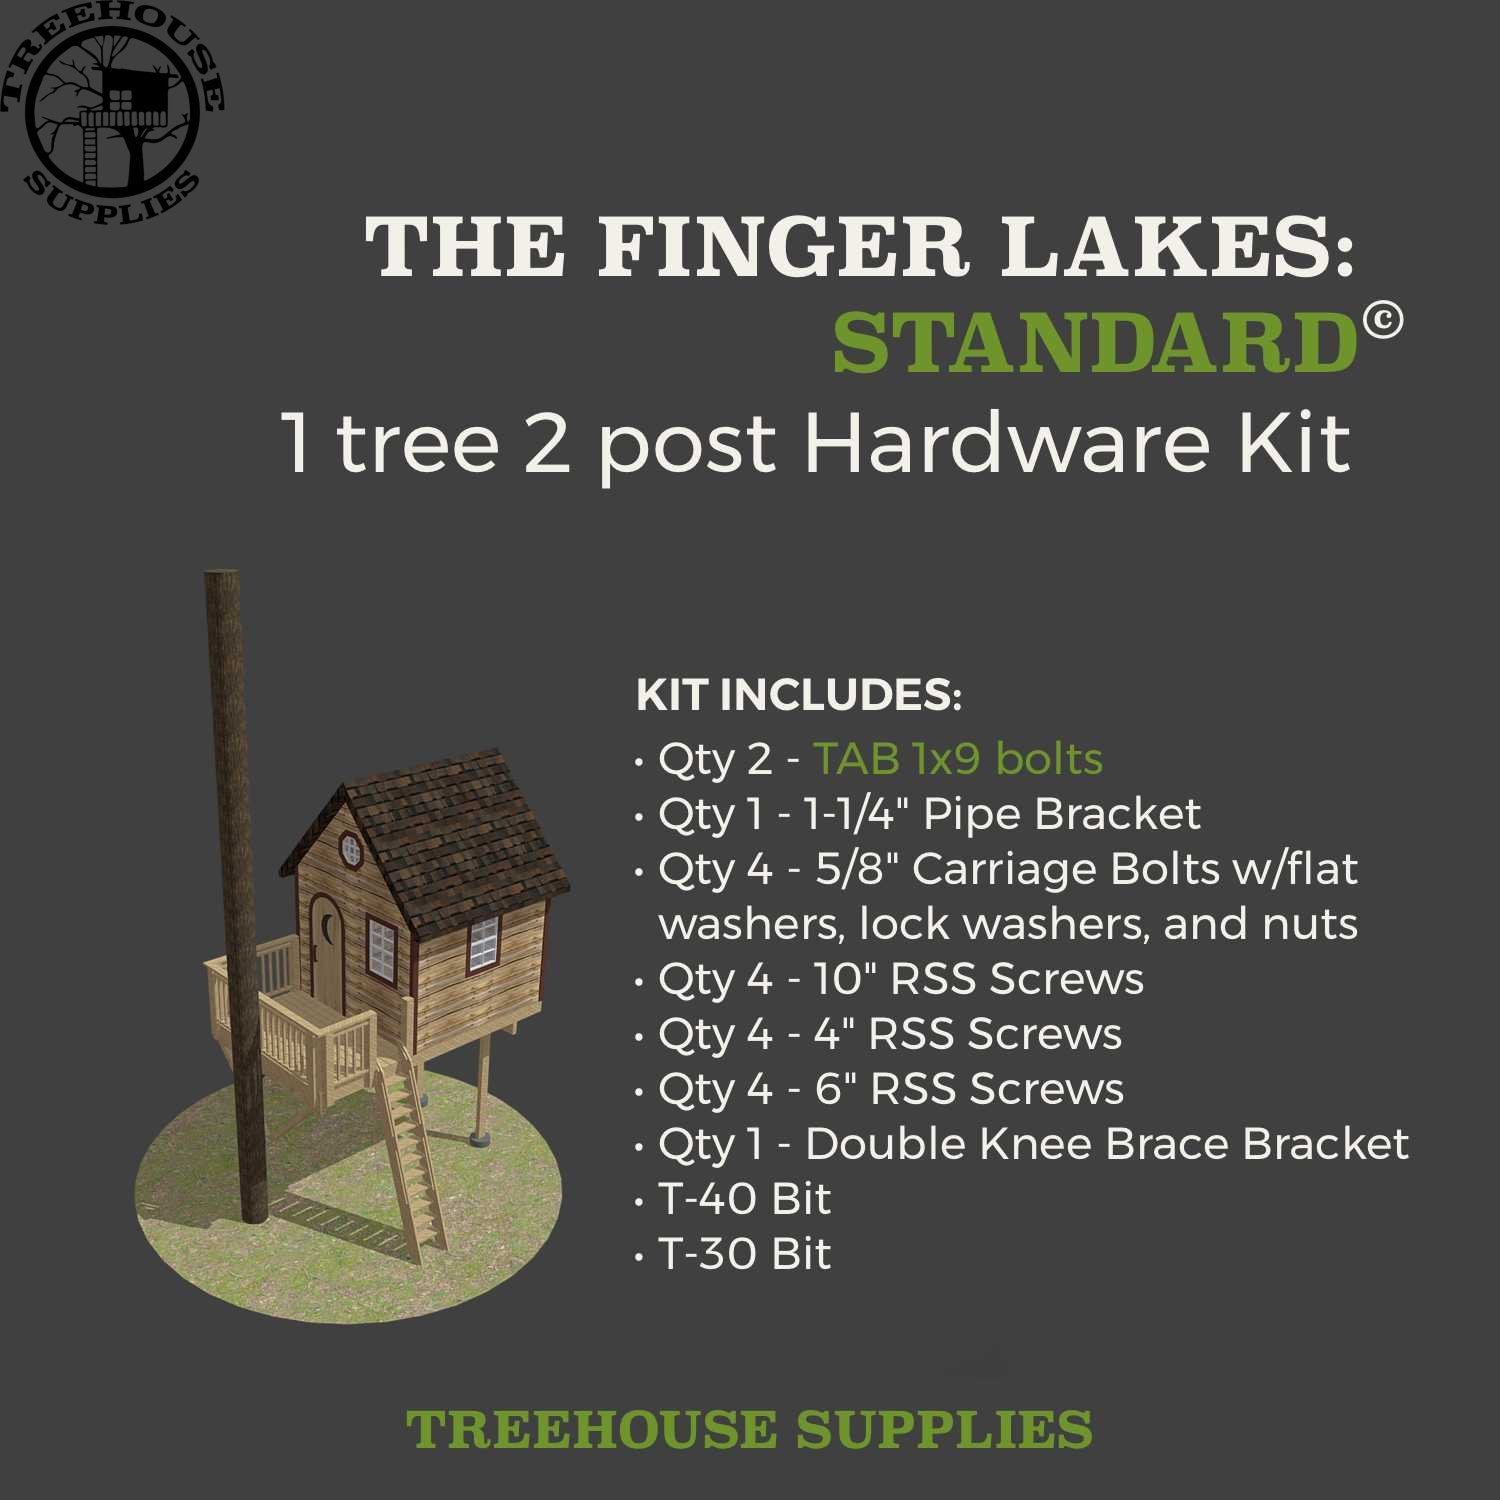 Treehouse Supplies THE FINGER LAKES: SMALL © 1 tree 2 post hardware kit 